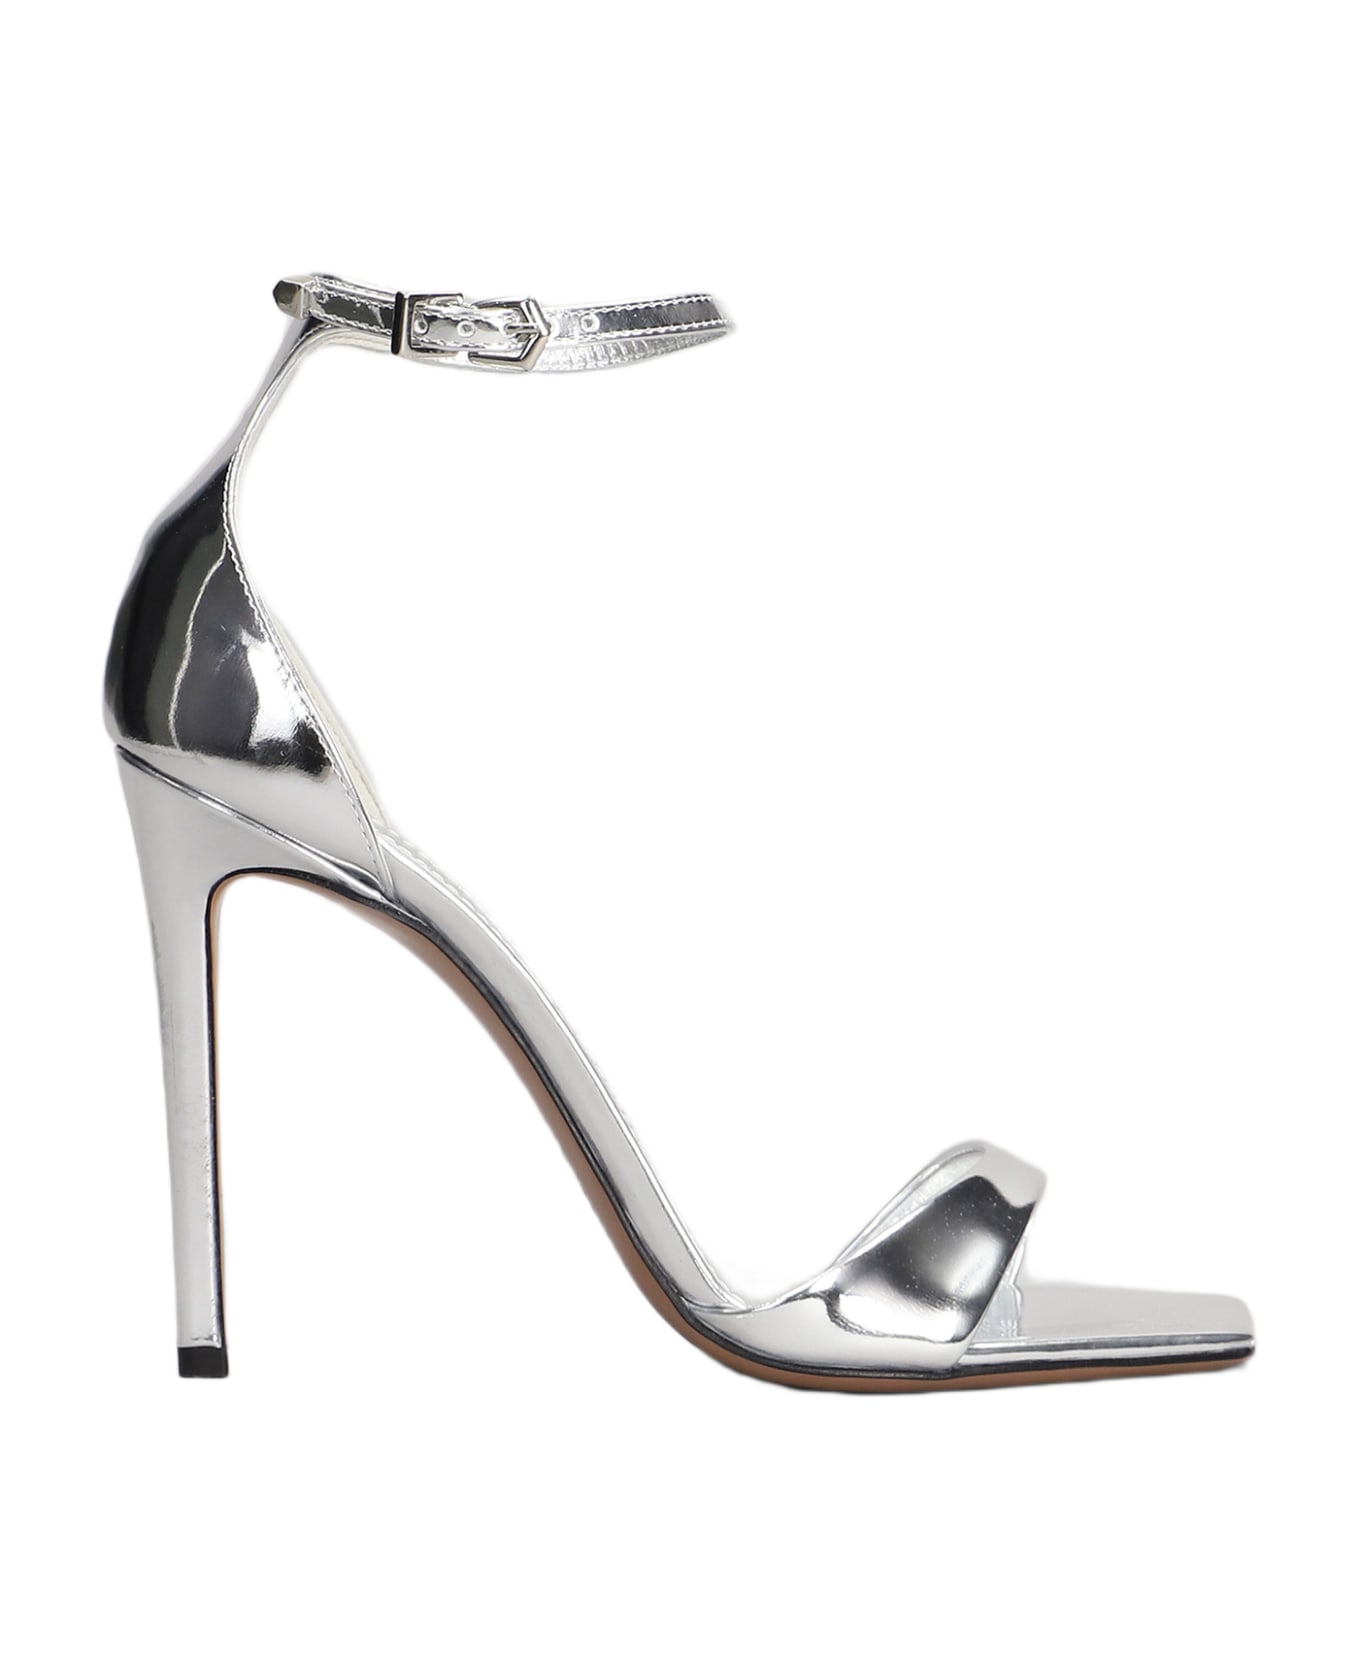 Paris Texas Sandals In Silver Leather - silver